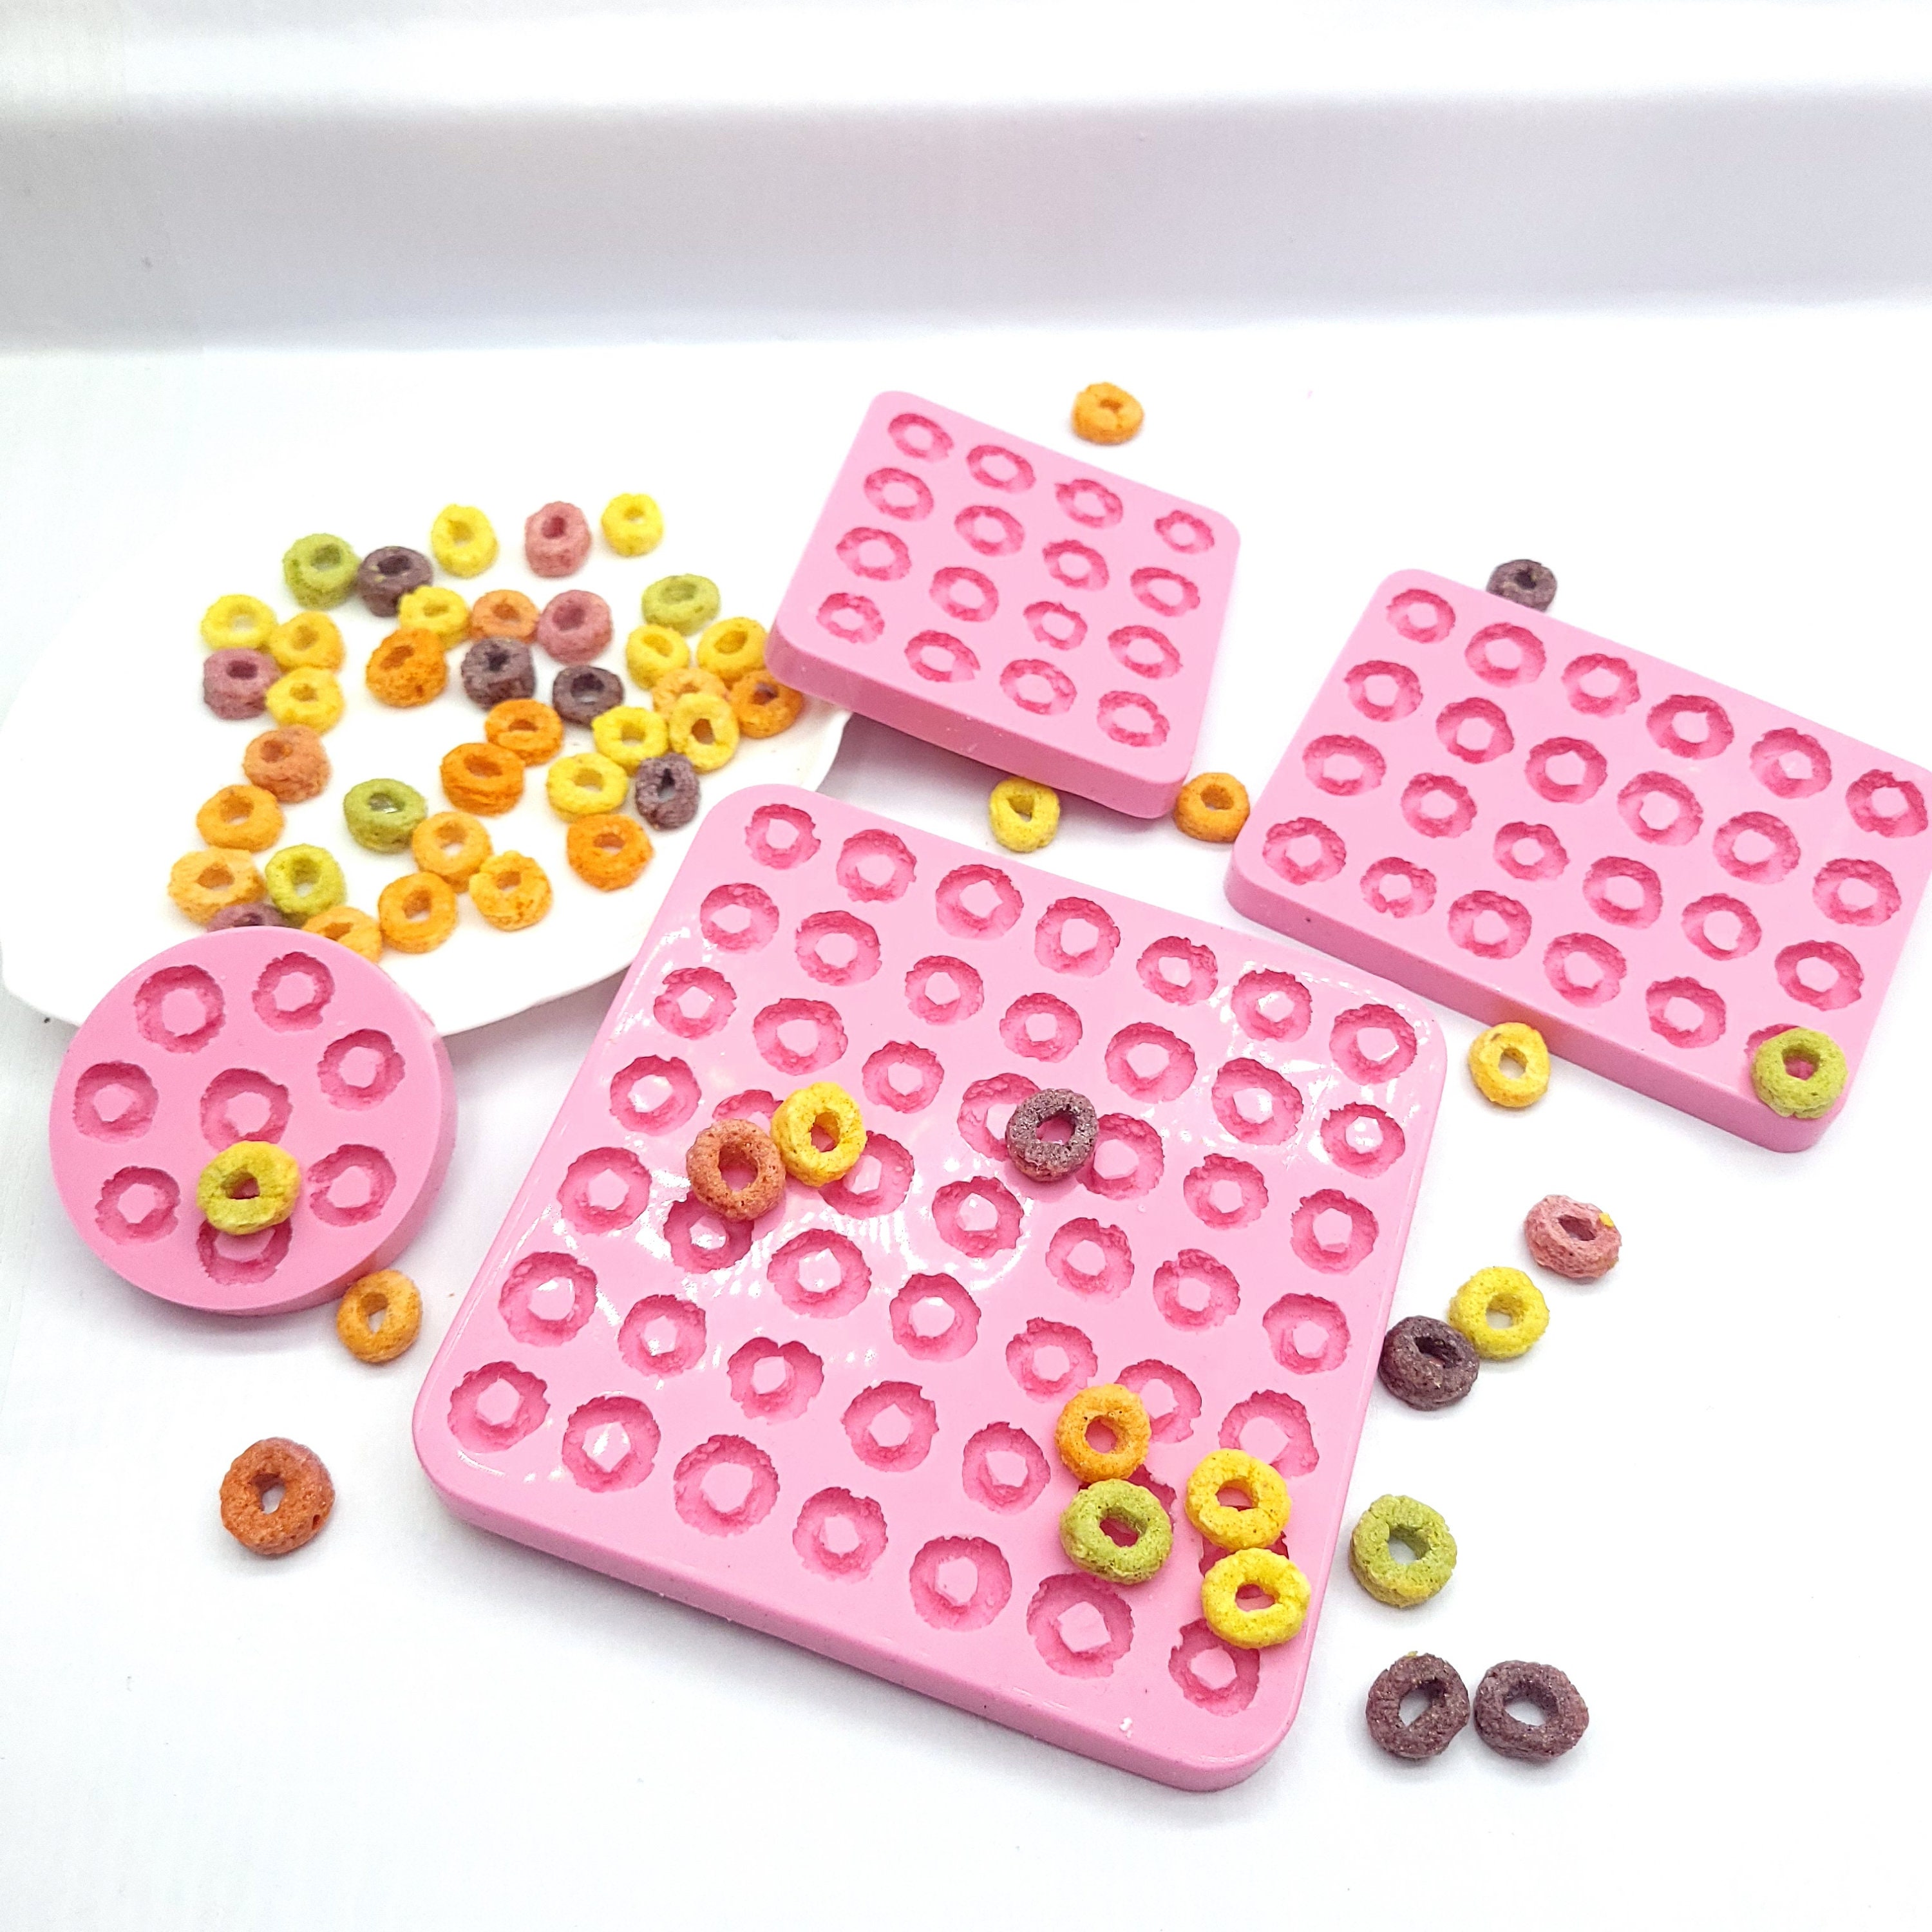 Peach Rings Silicone Mold 7 Cavities Mini Donuts Mold Ring Mold Silicone  Mold Food Mold Fake Bake Mold Soap Mold Candy Mold Chocolate Mold 